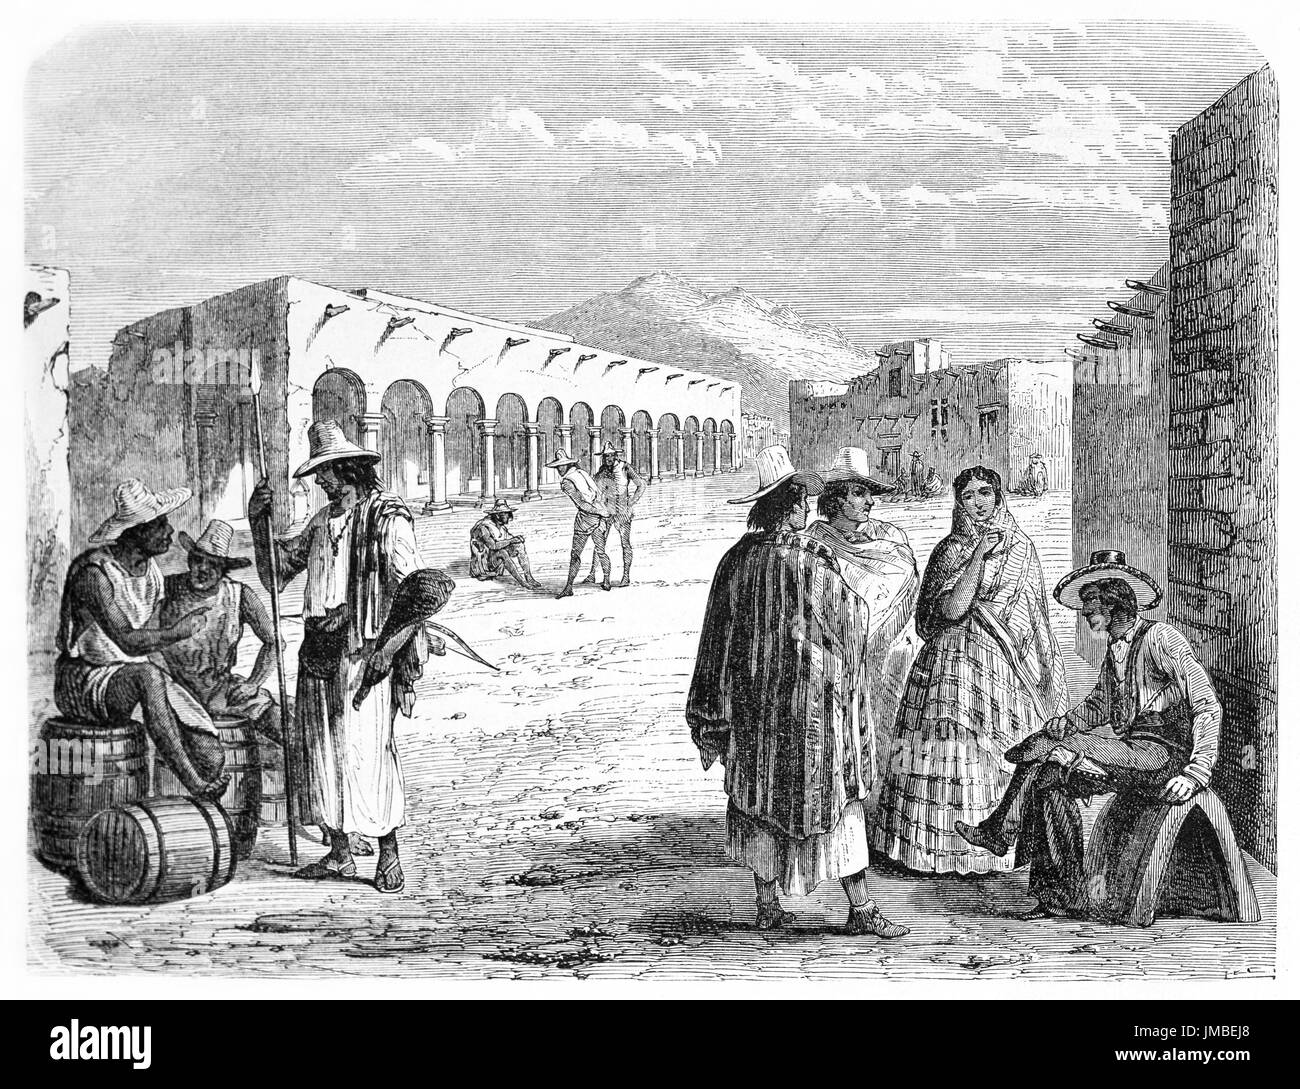 mexican people in their everyday life in Slaughter square in Chihuahua, Mexico. Ancient grey tone etching style art by Maurand, Le Tour du Monde, 1861 Stock Photo